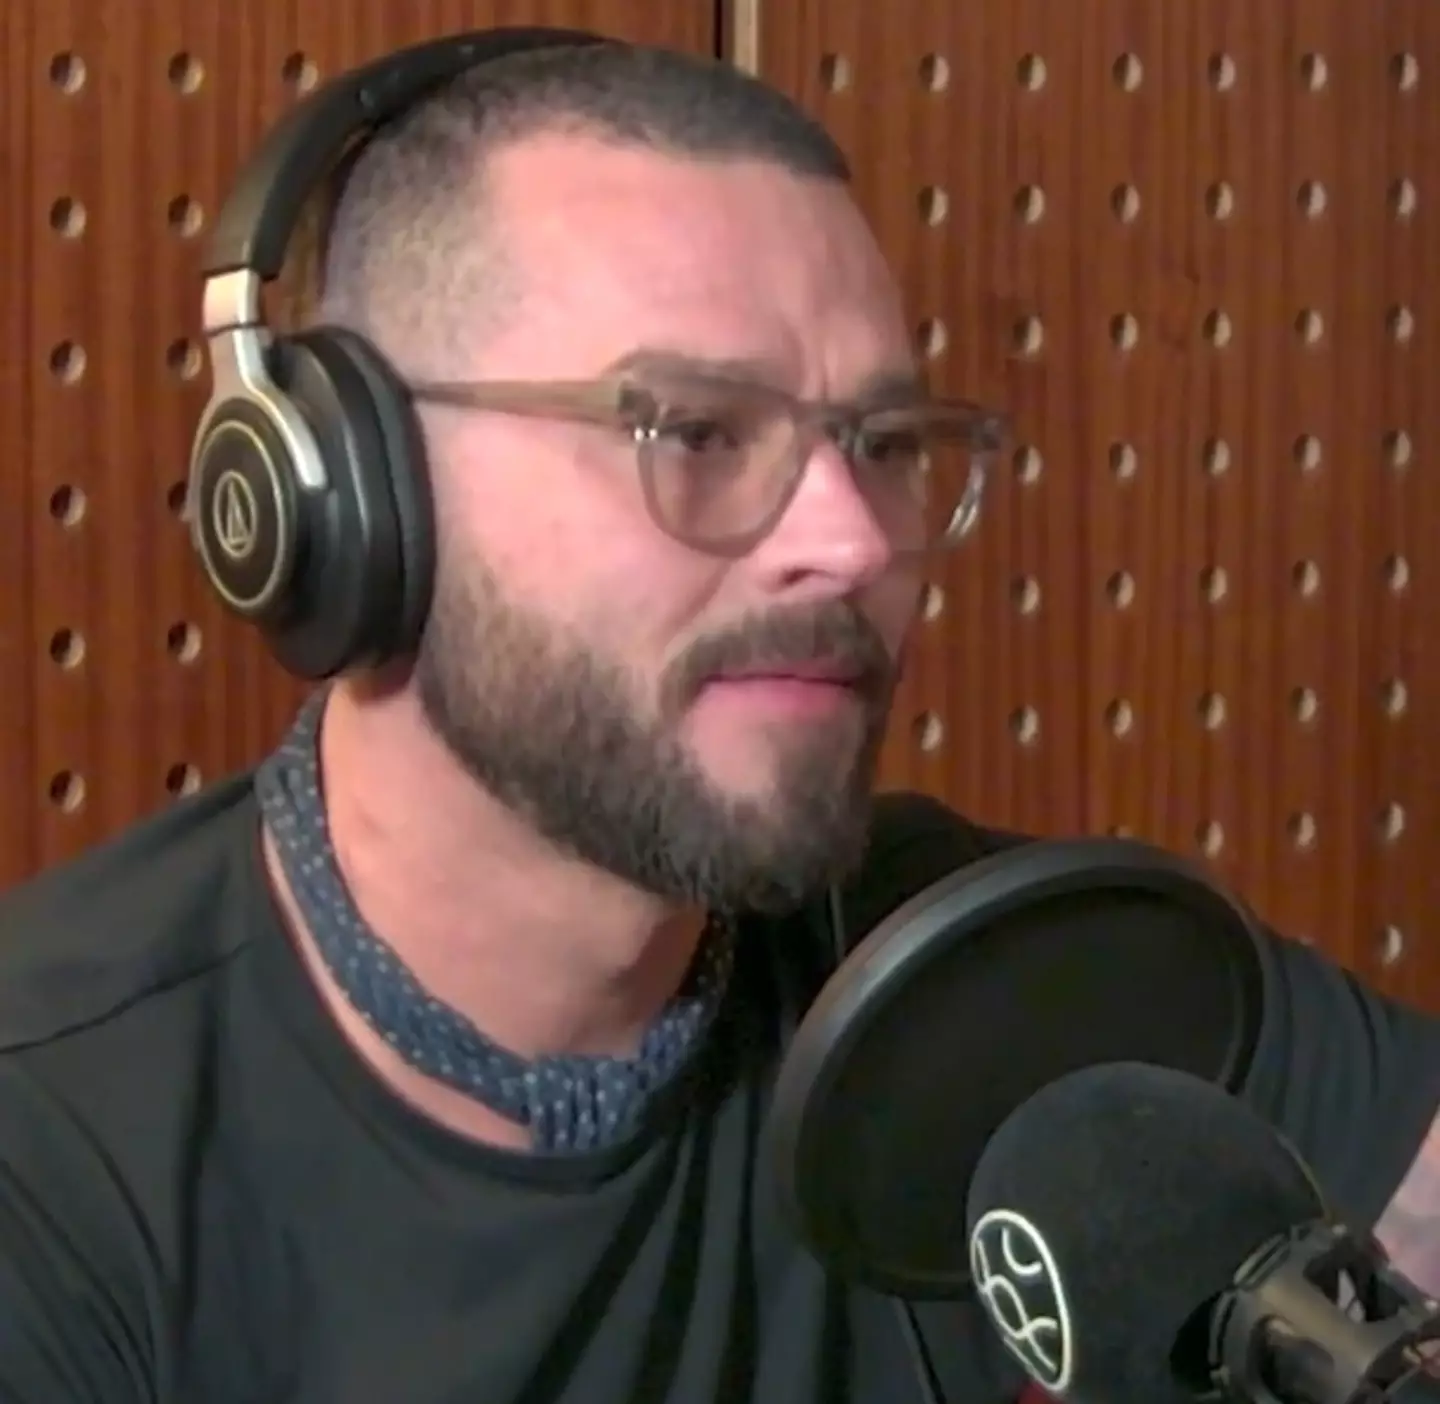 Matt Willis hosted Rylan on his On The Mend podcast and listened attentively.